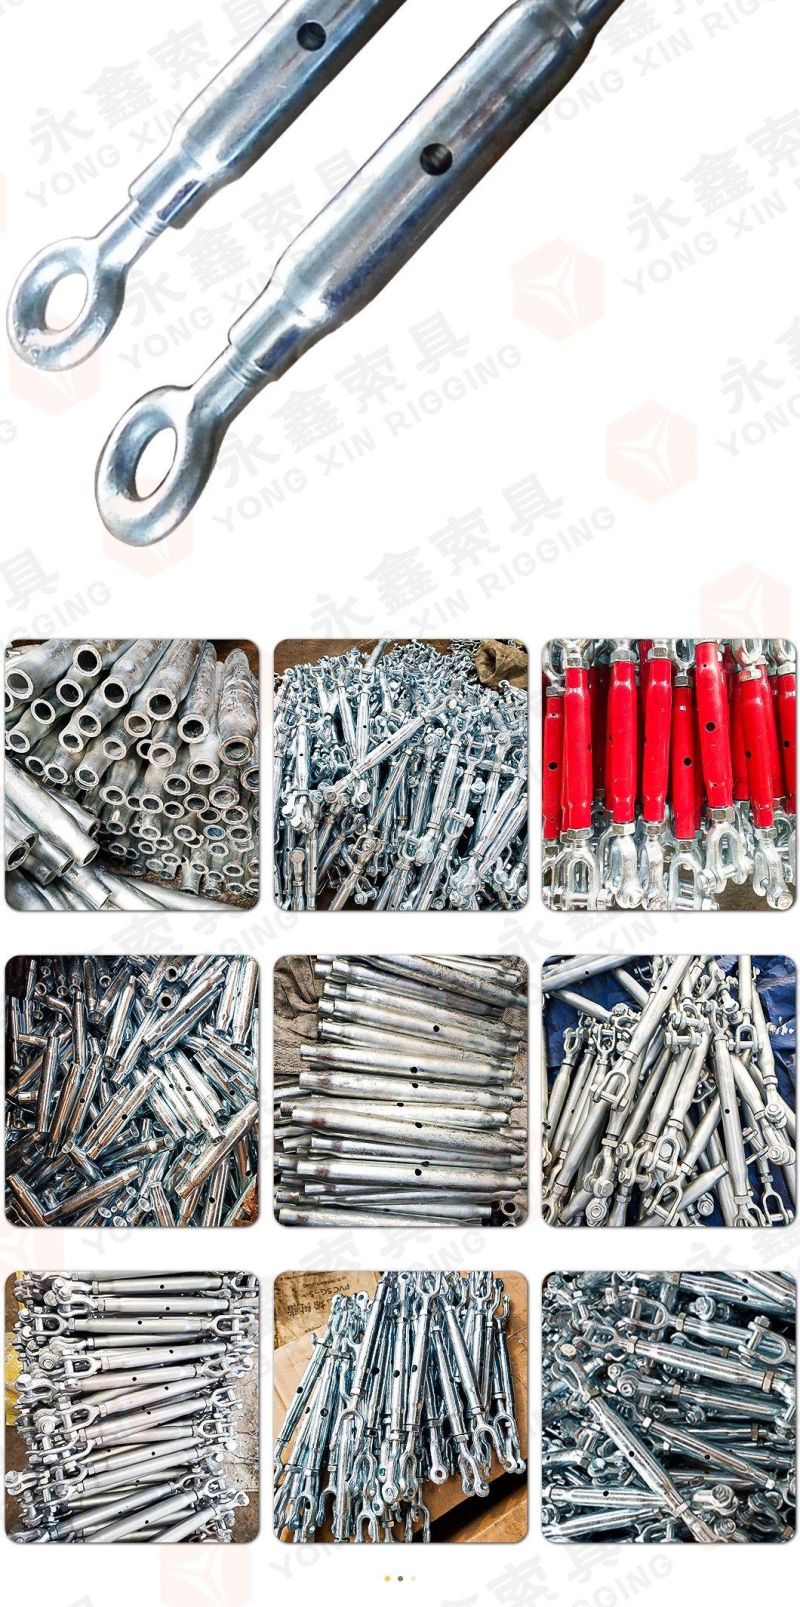 Qingdao DIN1478 Closed Body Pipe Turnbuckle